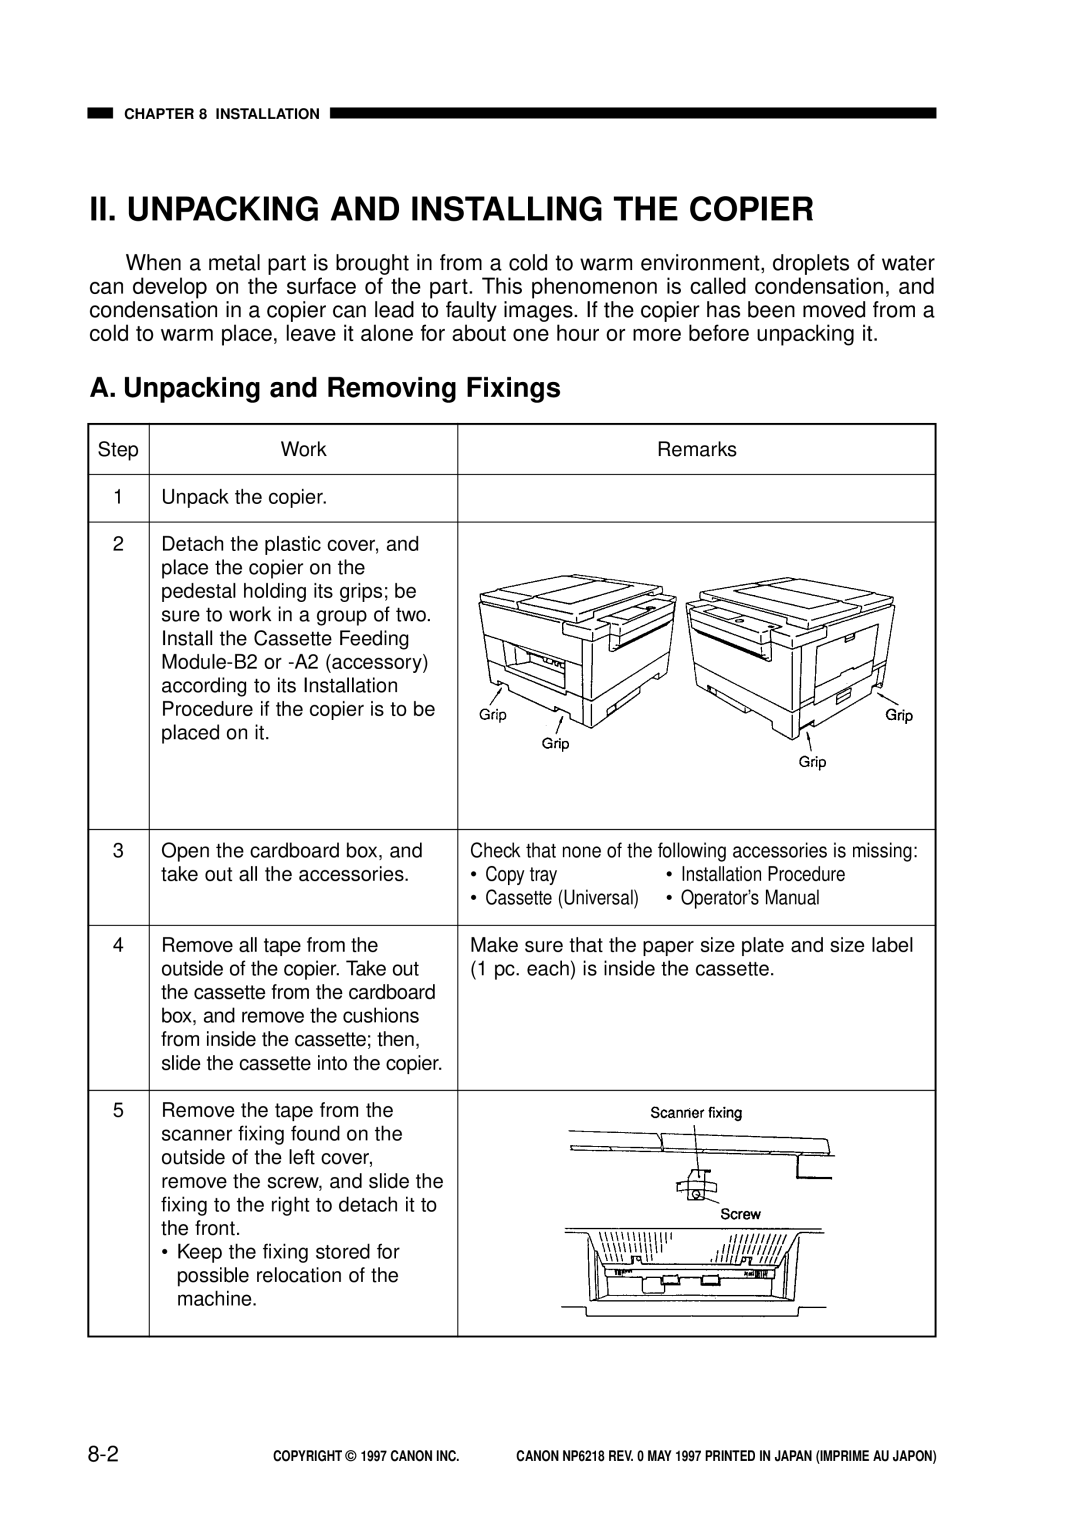 Canon NP6218, FY8-13EX-000 service manual Ii. Unpacking And Installing The Copier, A. Unpacking and Removing Fixings 